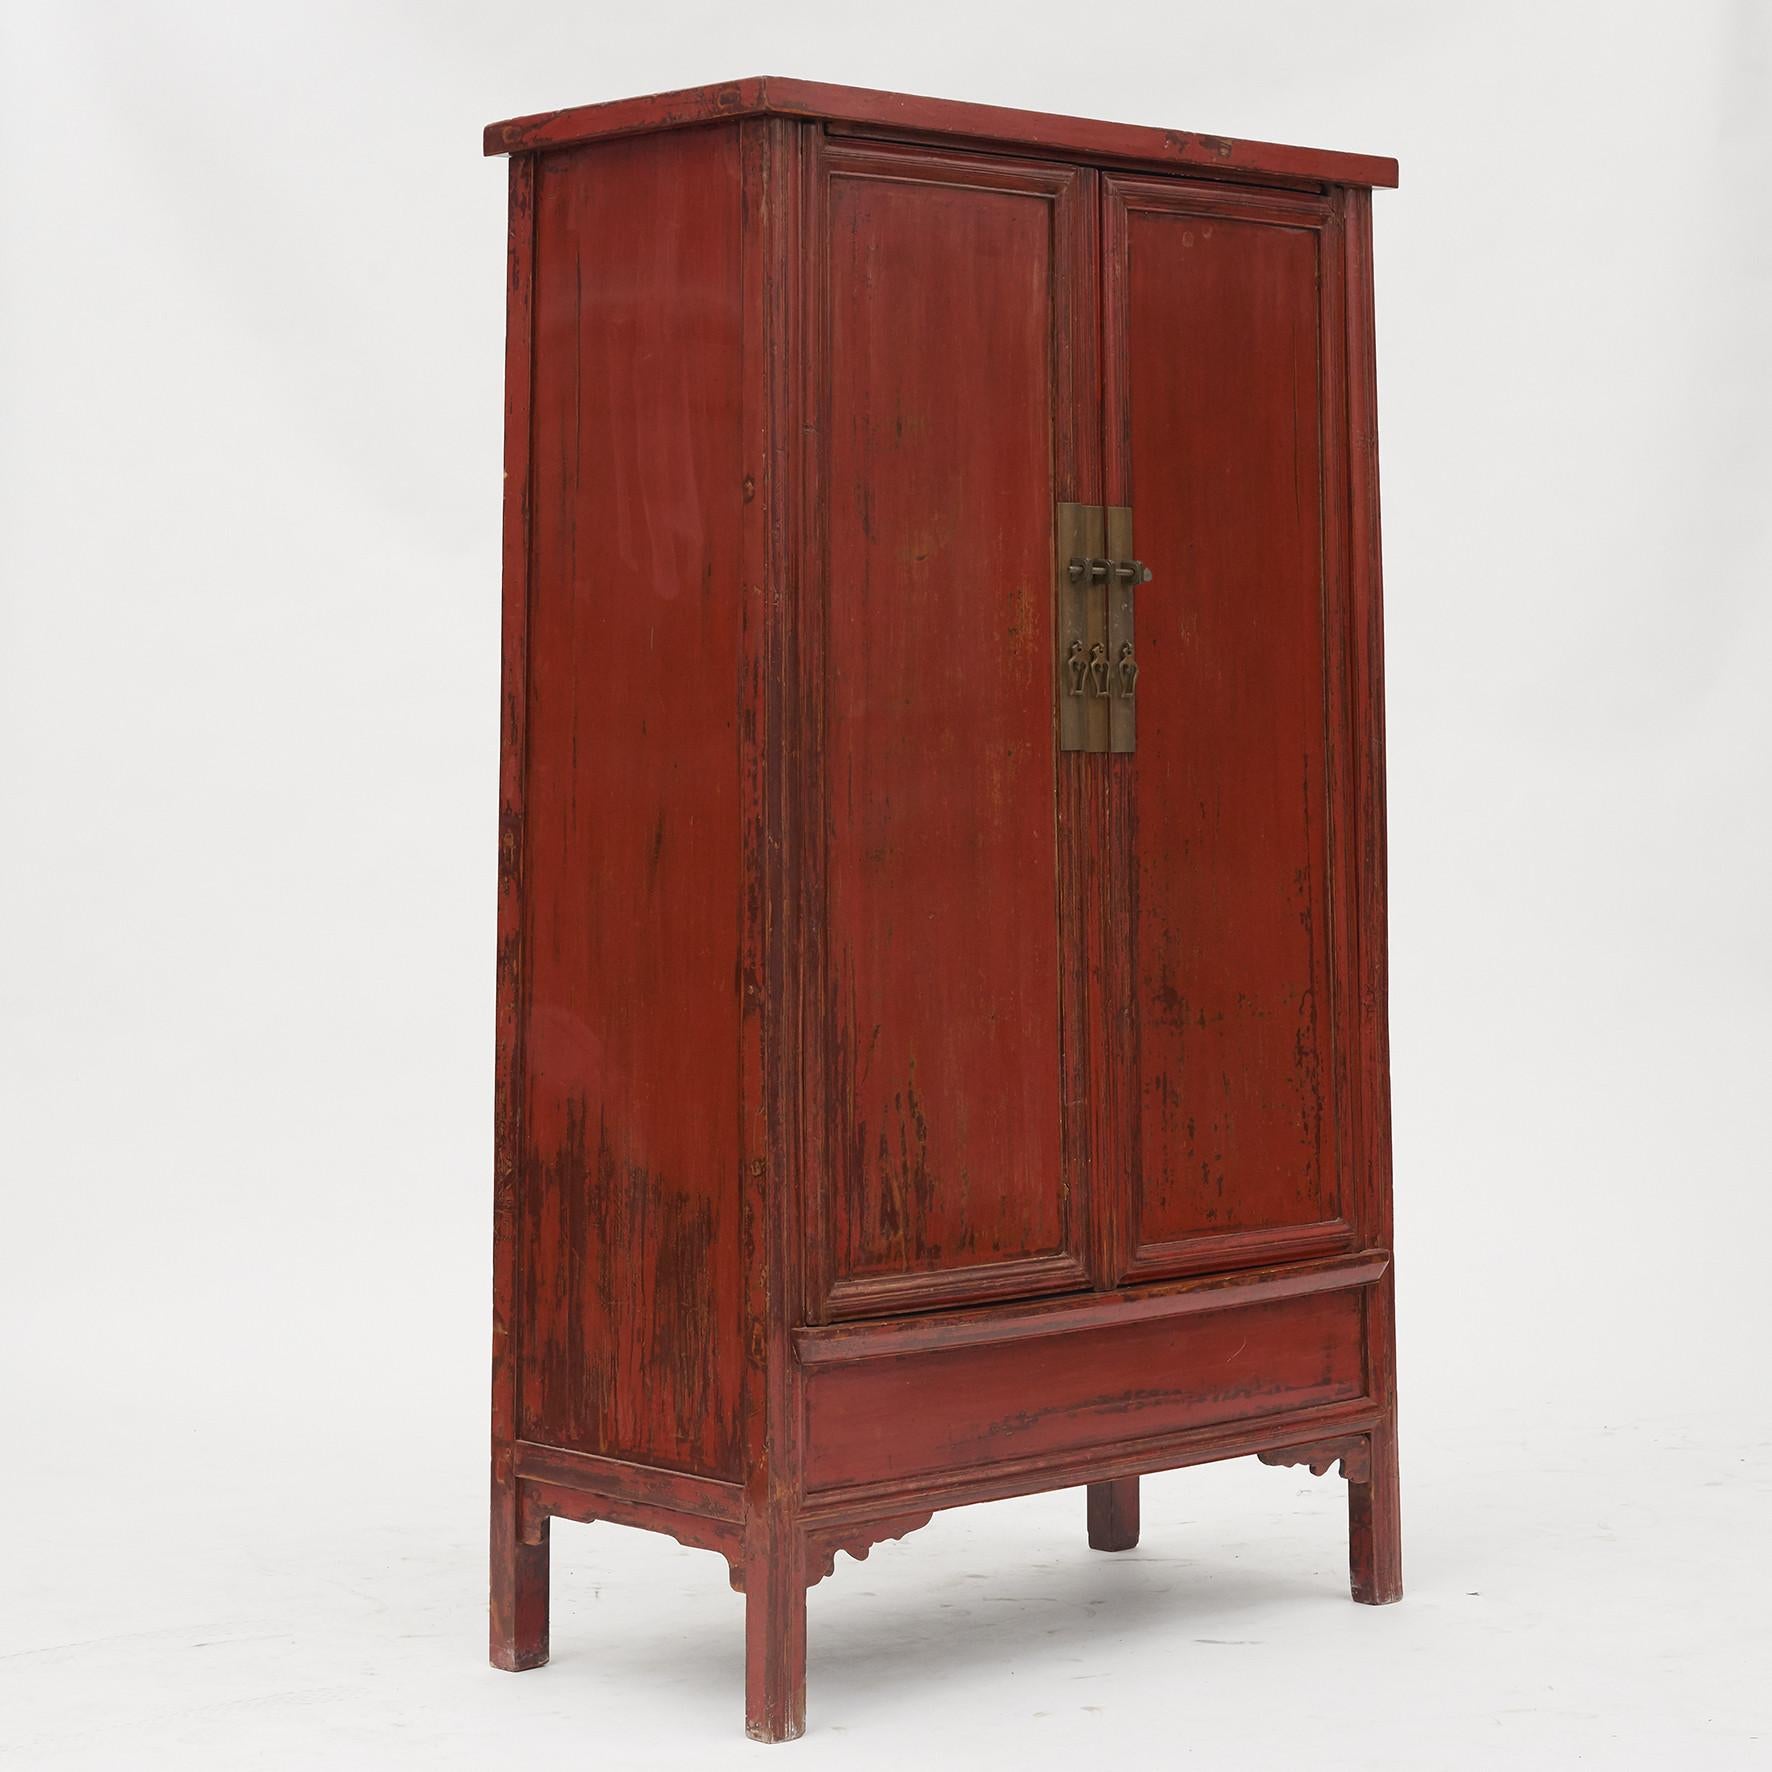 Ming style lacquered wedding cabinet from Suzhou near Shanghai, mid-19th century.
With preserved original red lacquer. Pair of doors fitted with bronze lock. Inside shelves and pair of drawers.
Rare good condition.

(K).